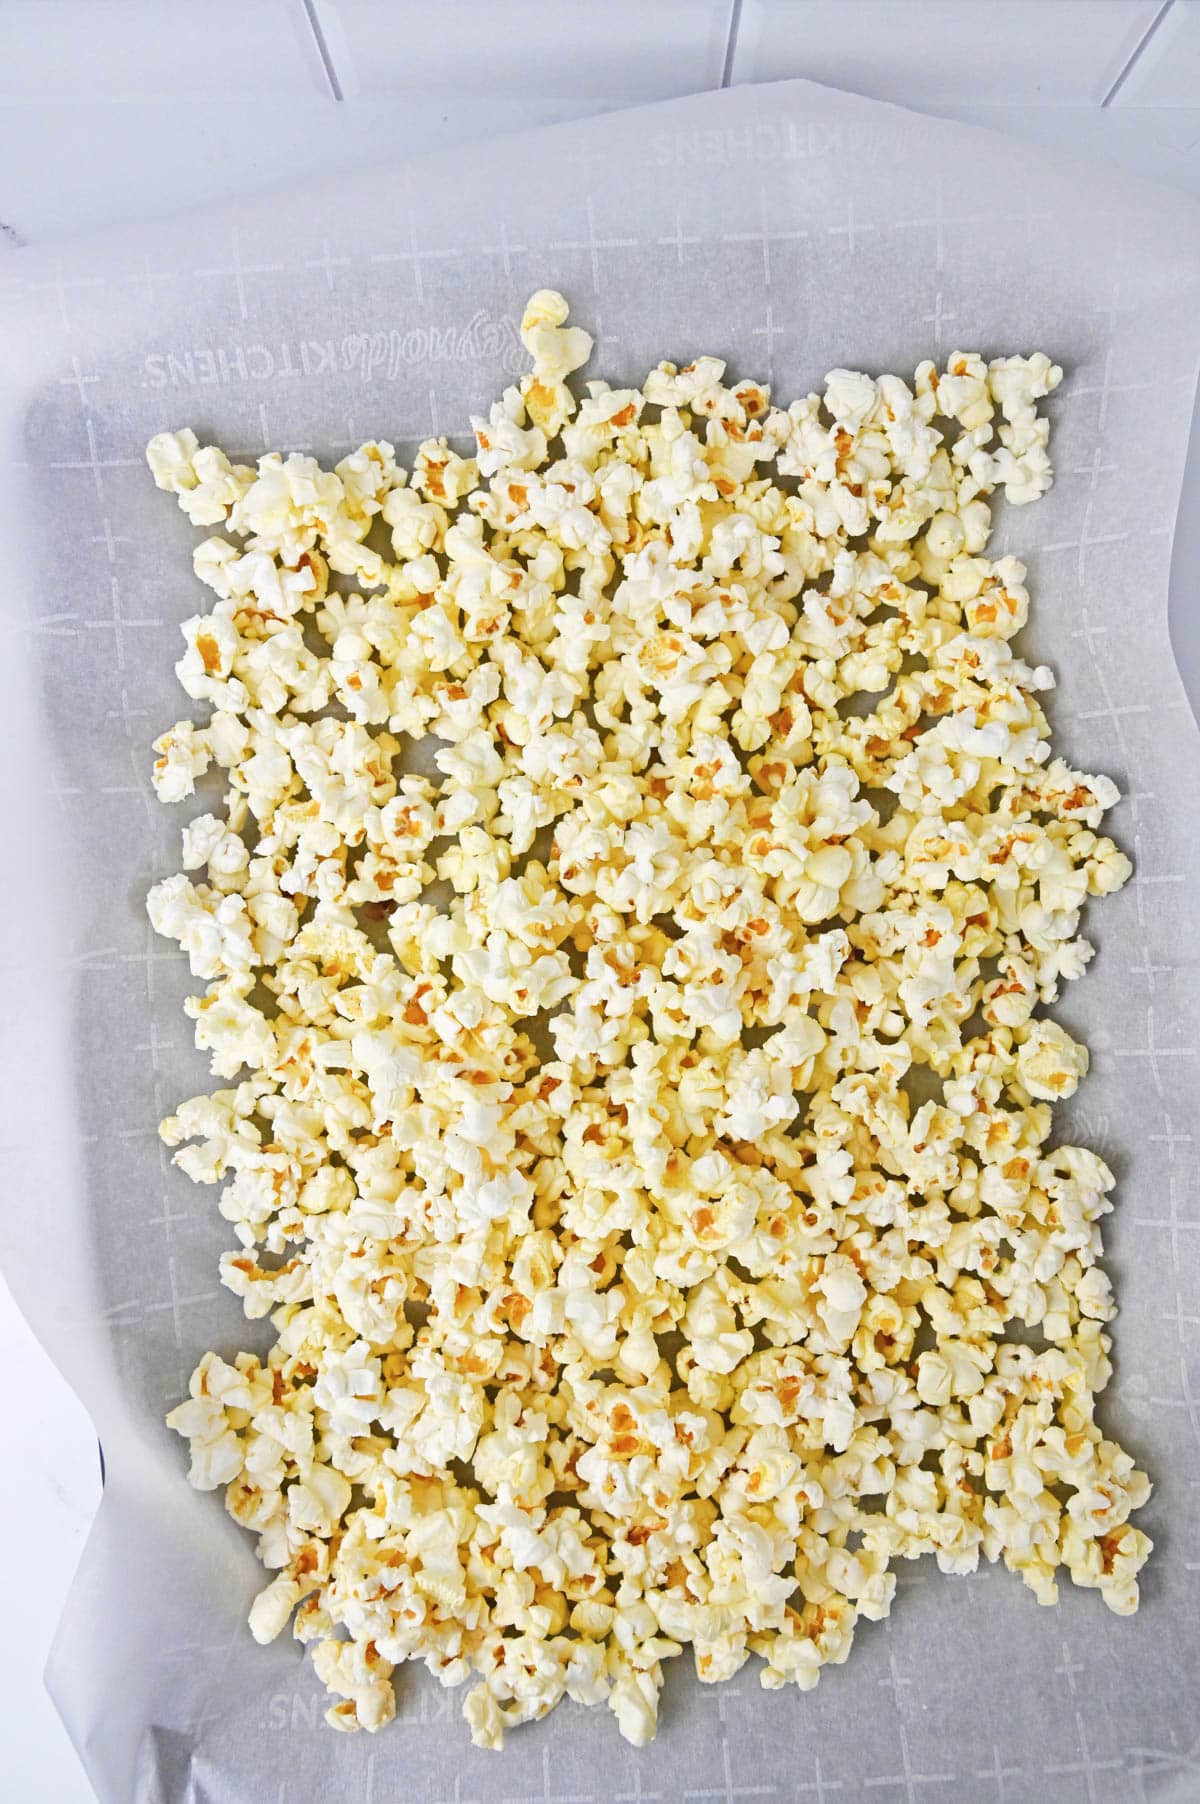 Popcorn spread out in a pan